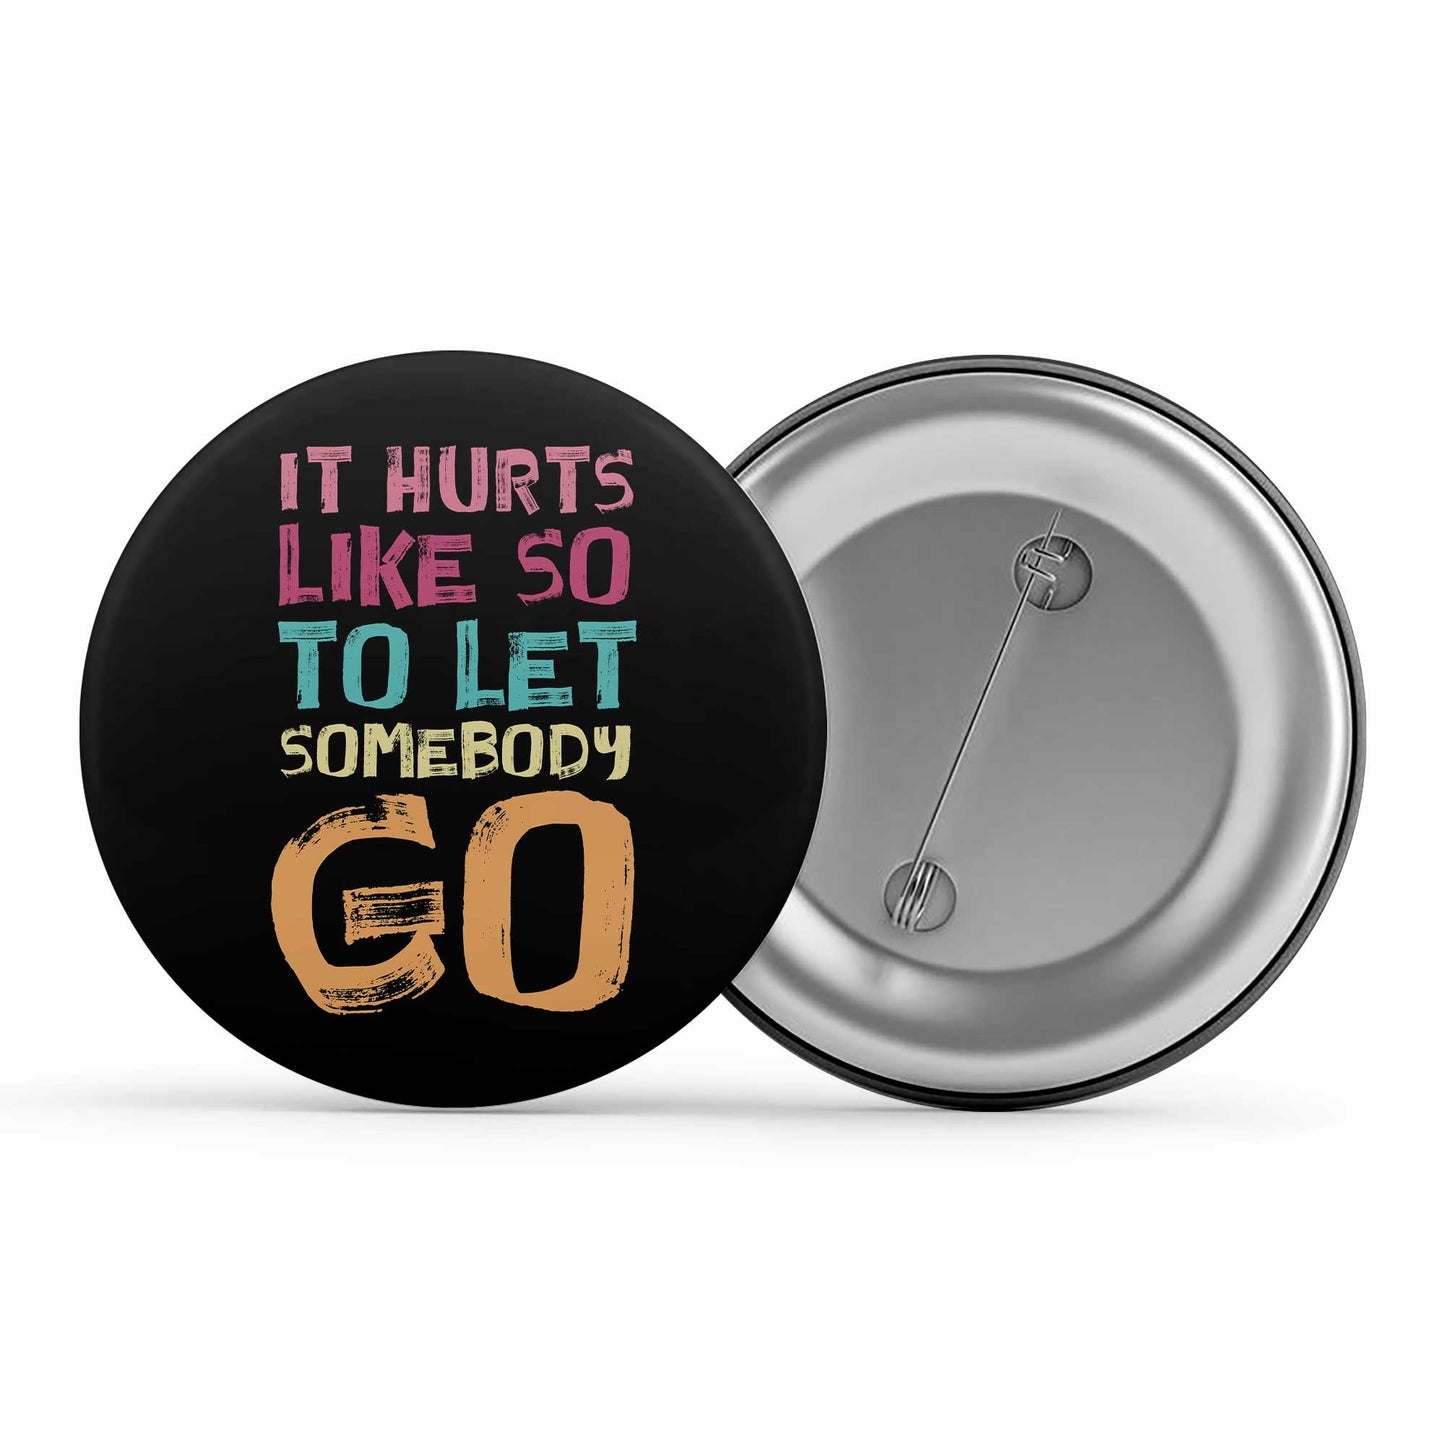 coldplay let somebody go badge pin button music band buy online india the banyan tee tbt men women girls boys unisex